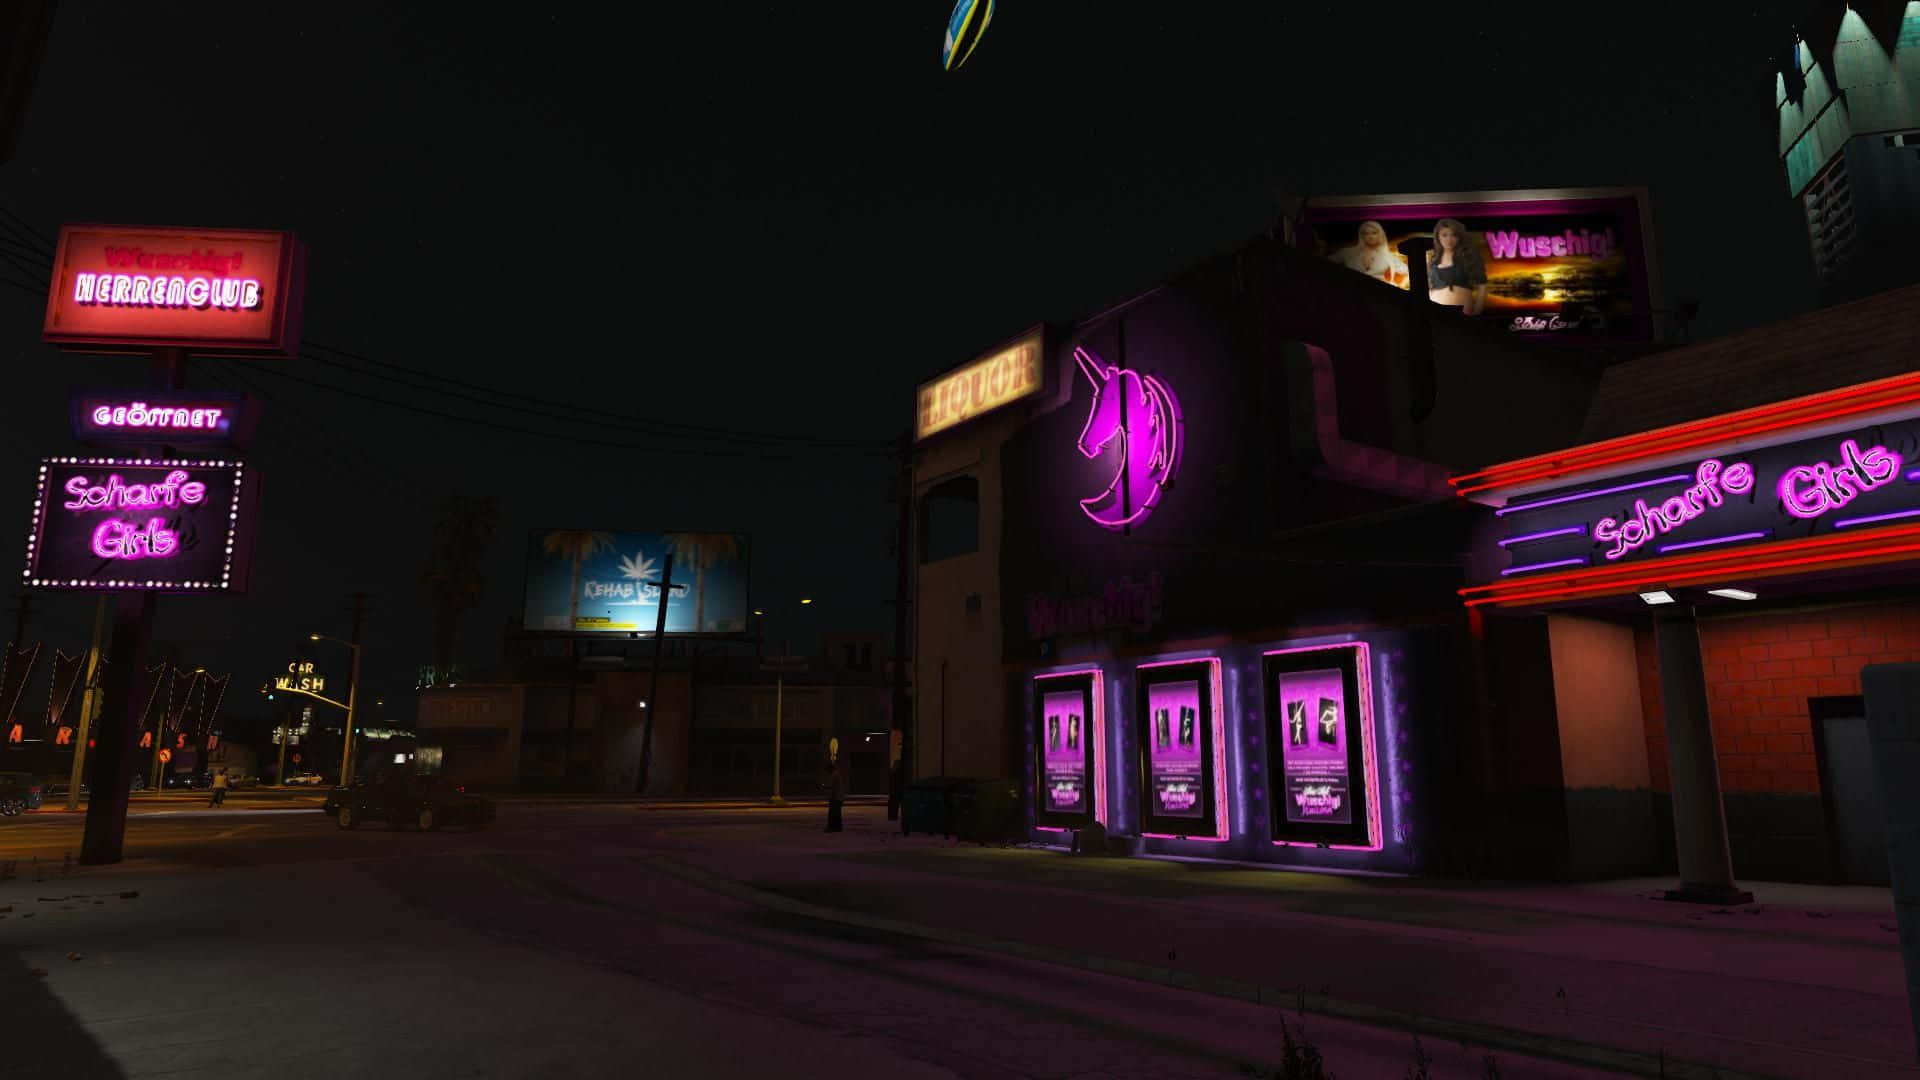 A Night Scene With Neon Lights And Neon Signs